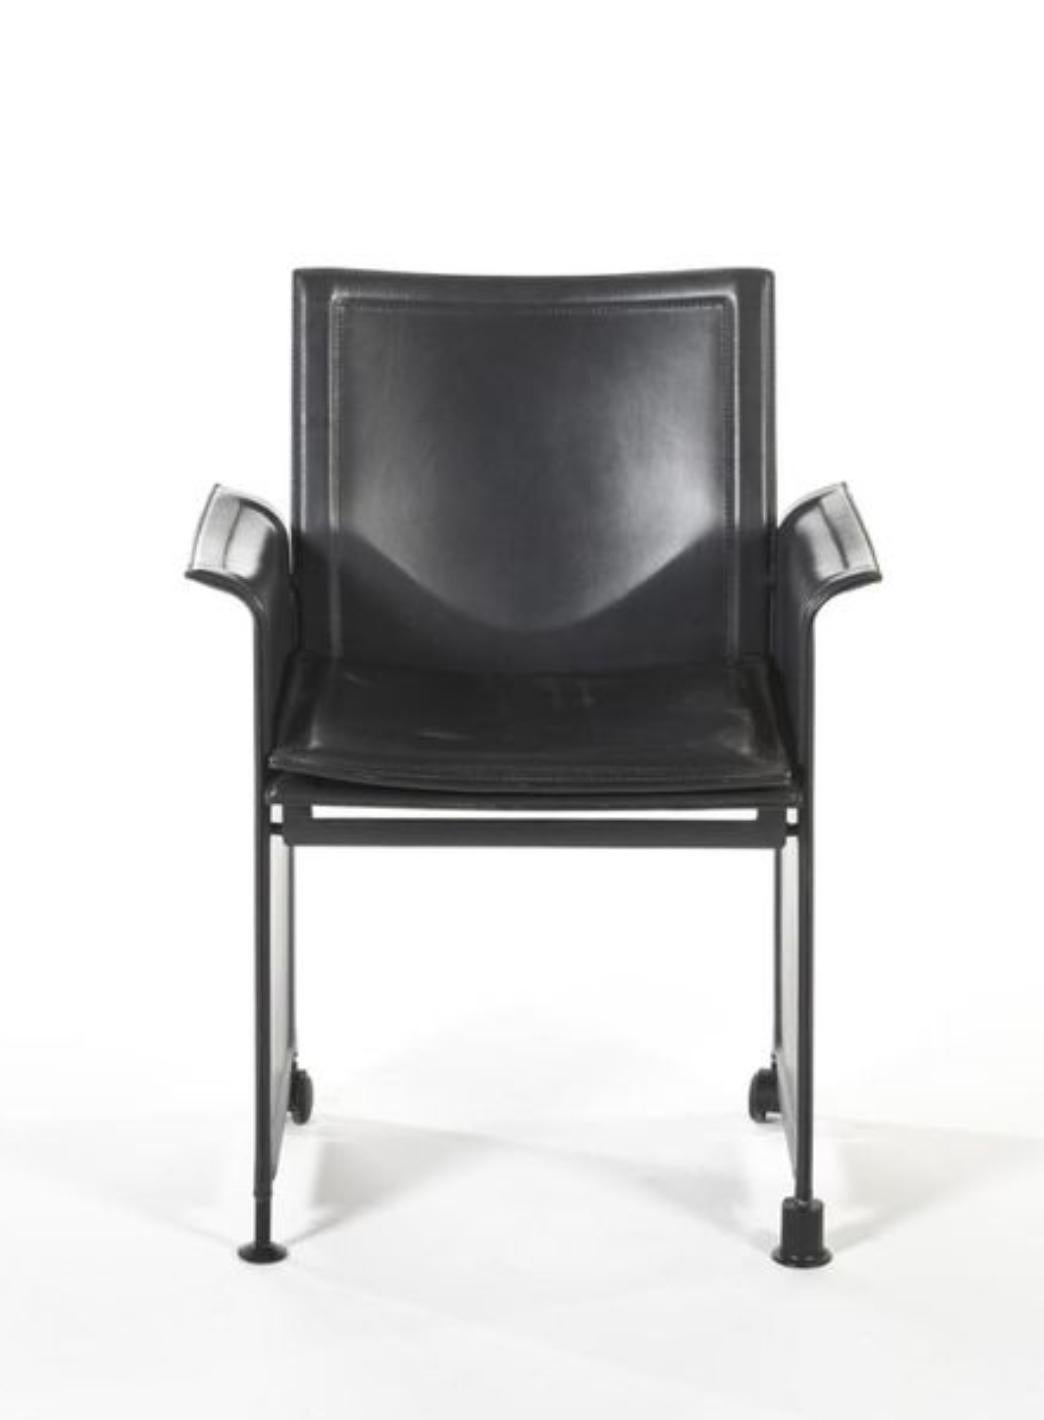 Midcentury leather armchair Korium by Tito Agnoli for Matteo Grassi.
Made in 1980 and in very good condition,
Italy.